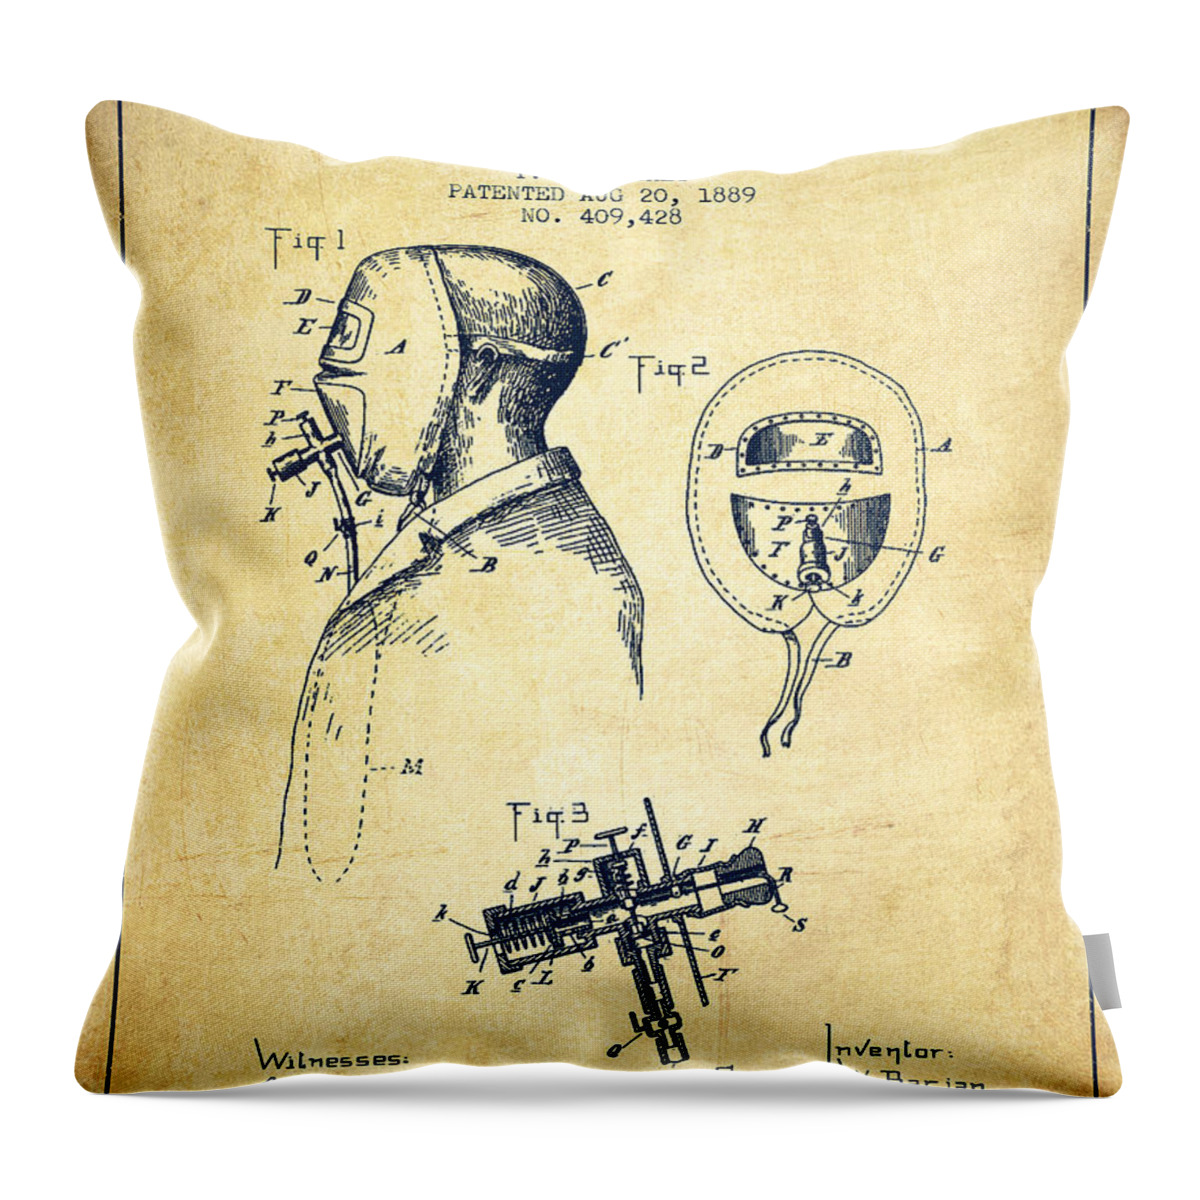 Fireman Throw Pillow featuring the digital art Firemans Safety Helmet Patent from 1889 - Vintage by Aged Pixel